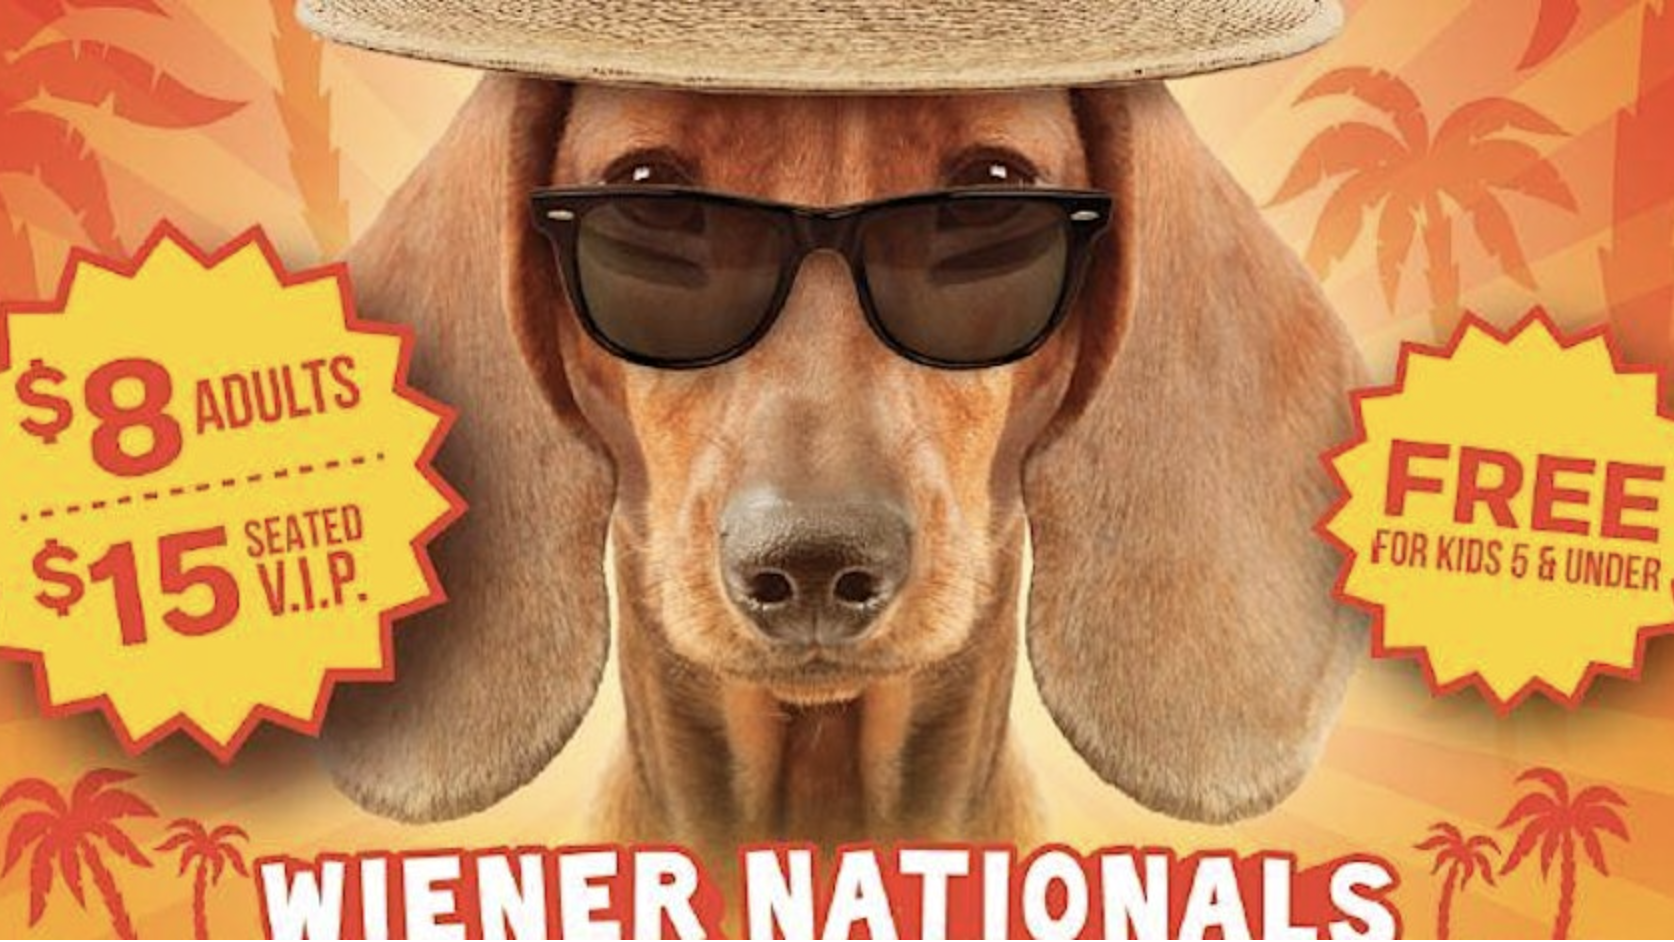 An advertisement for the Old World Wiener Nationals features a dachshund in a straw hat and sunglasses. Entry costs $8 for adults, $15 for seated V.I.P., and is free for kids 5 and under. Palm tree silhouettes are seen in the background.